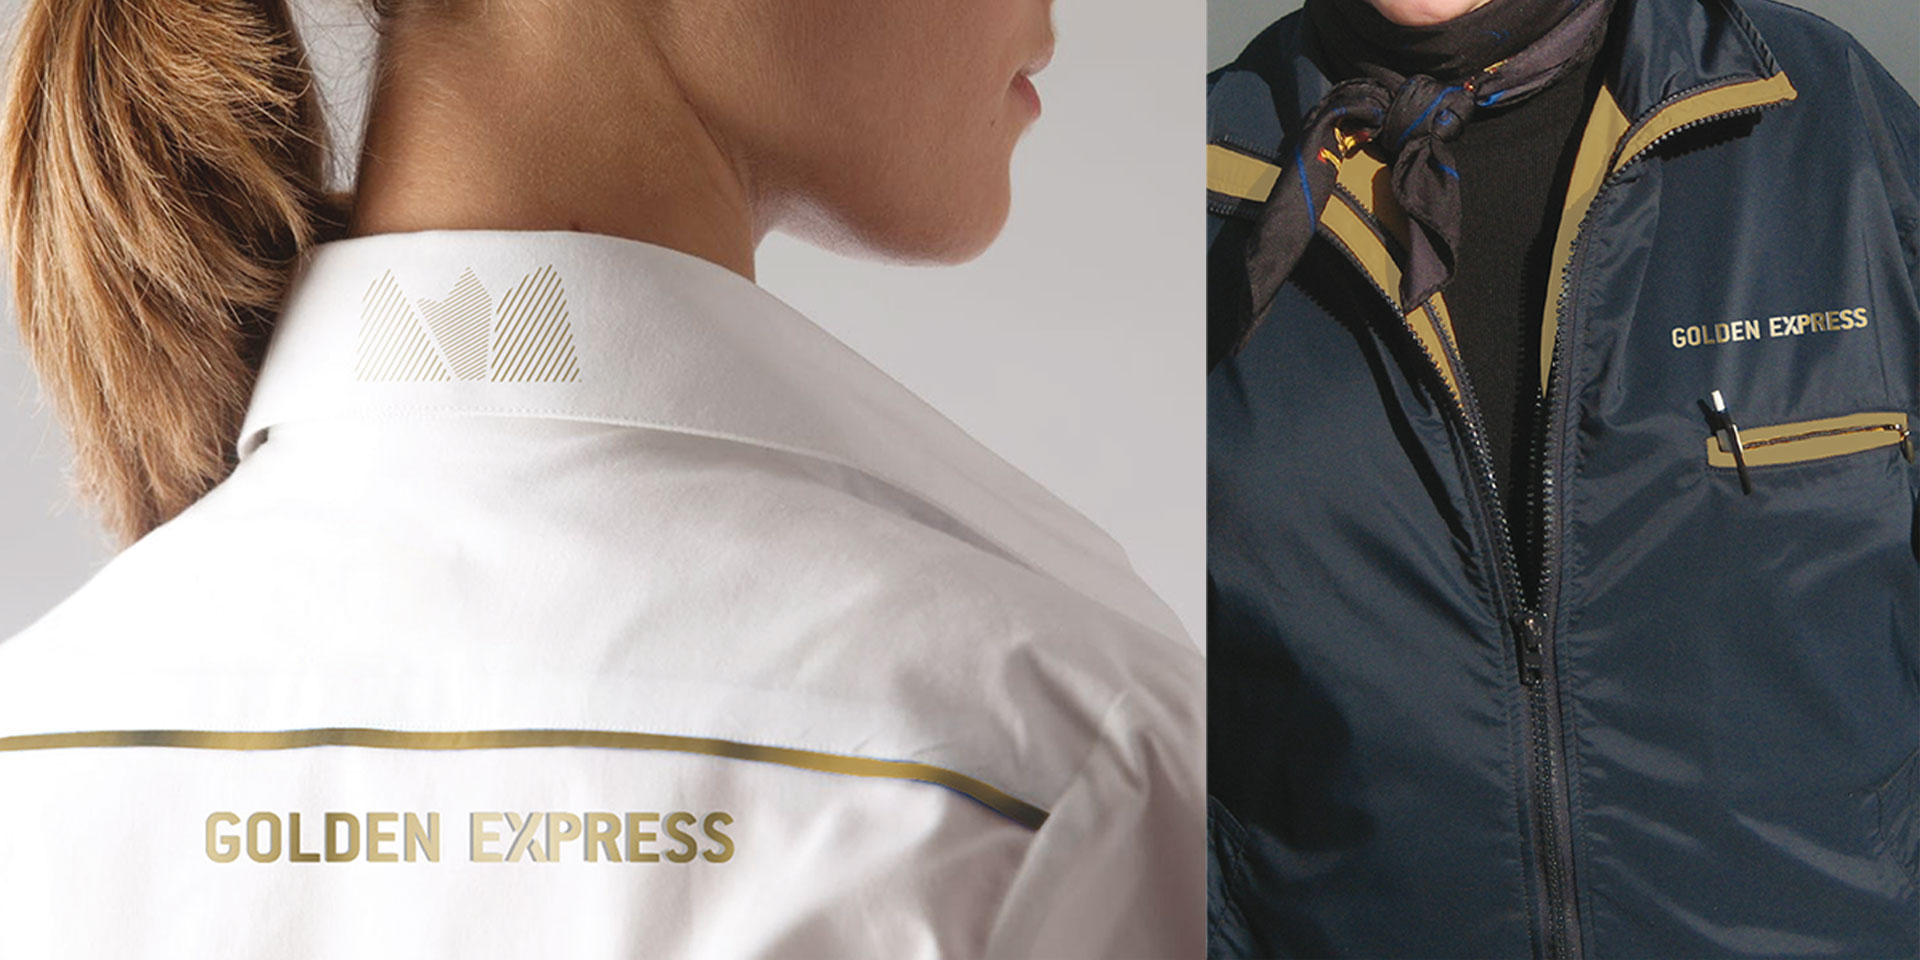 01 milani design consulting agency Goldenpass golden express bls corporate fashion textile transportation wear2